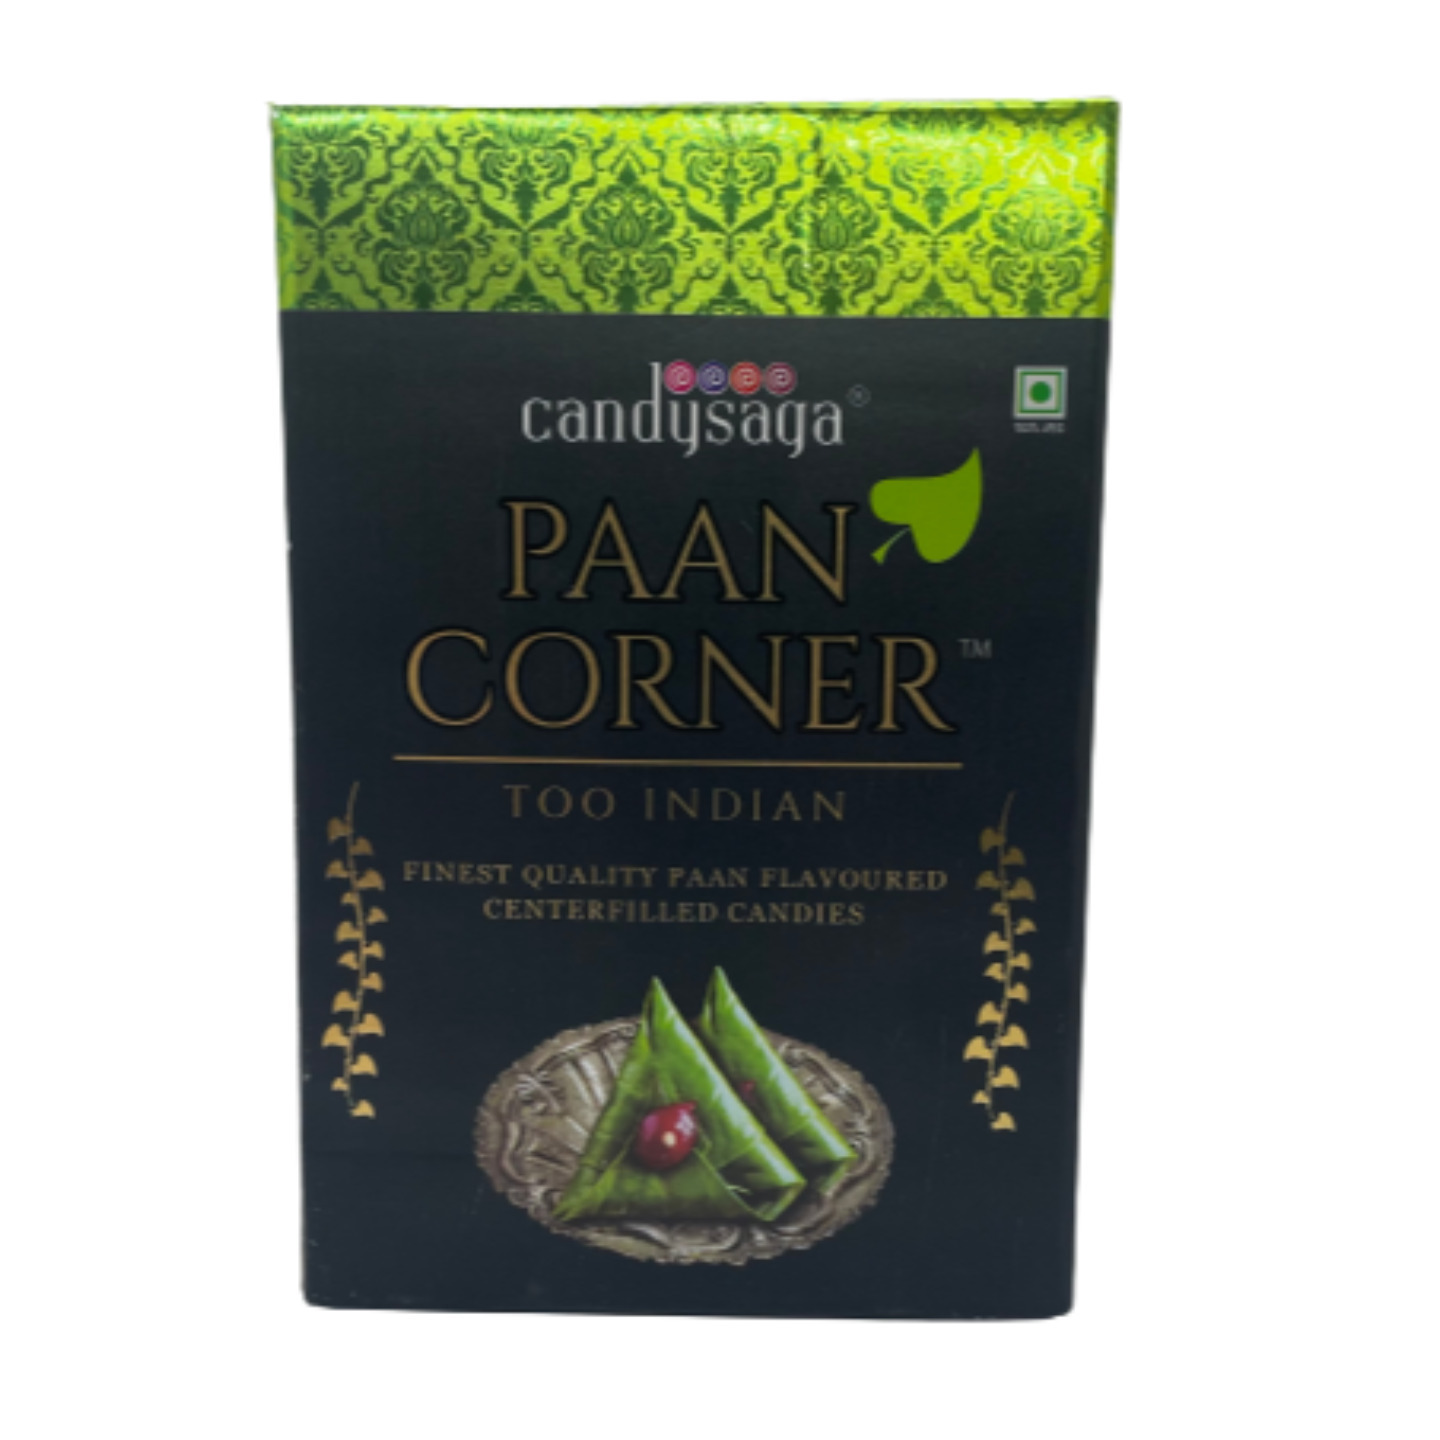 Candy saga Paan corner candy (Pack of 2)- 200 Pieces 